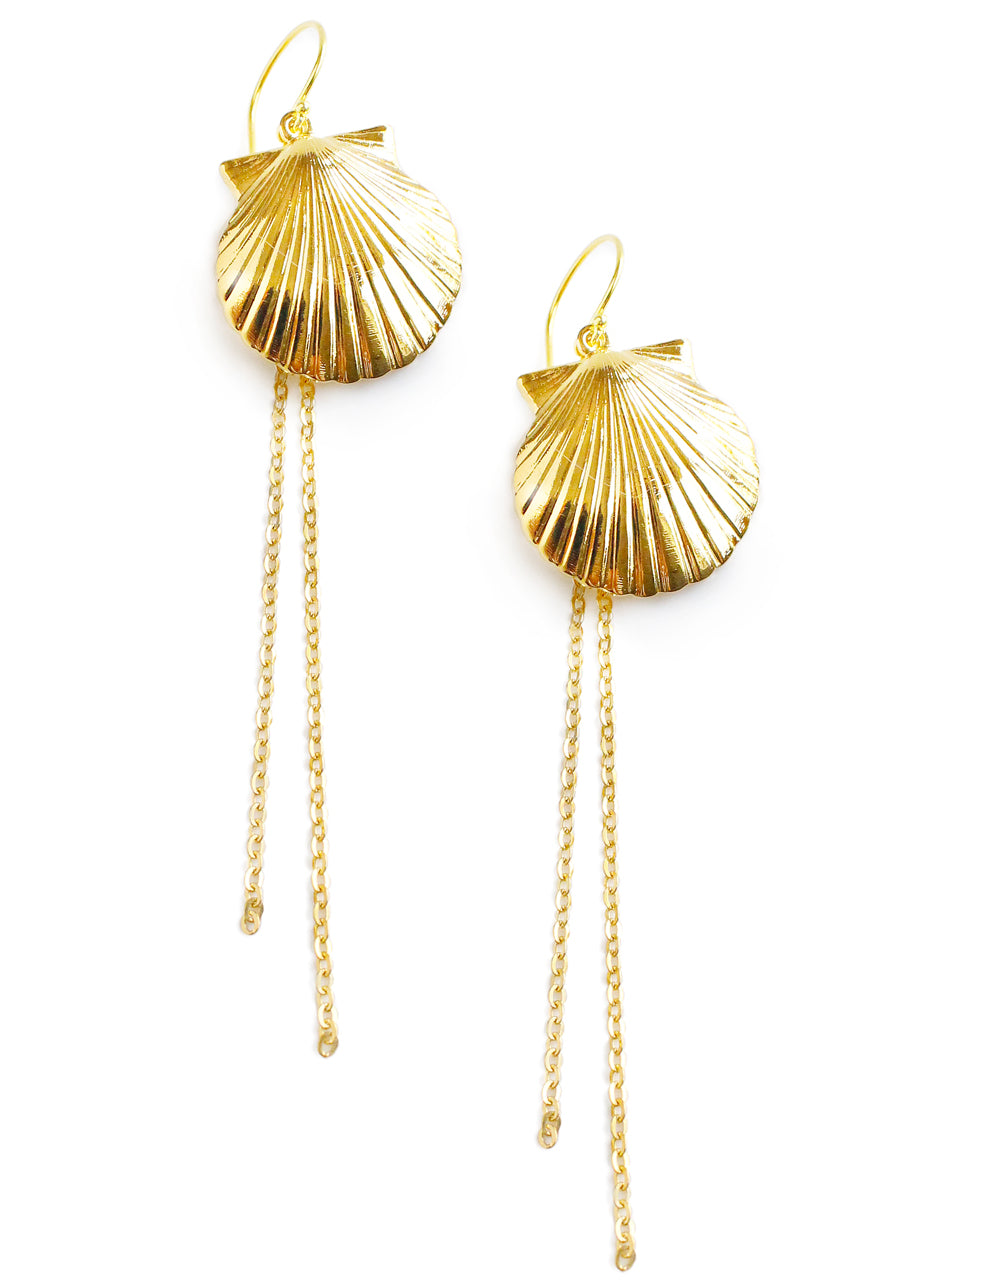 Hammered Gold Shell Earrings by Henry Dunay | M.S. Rau